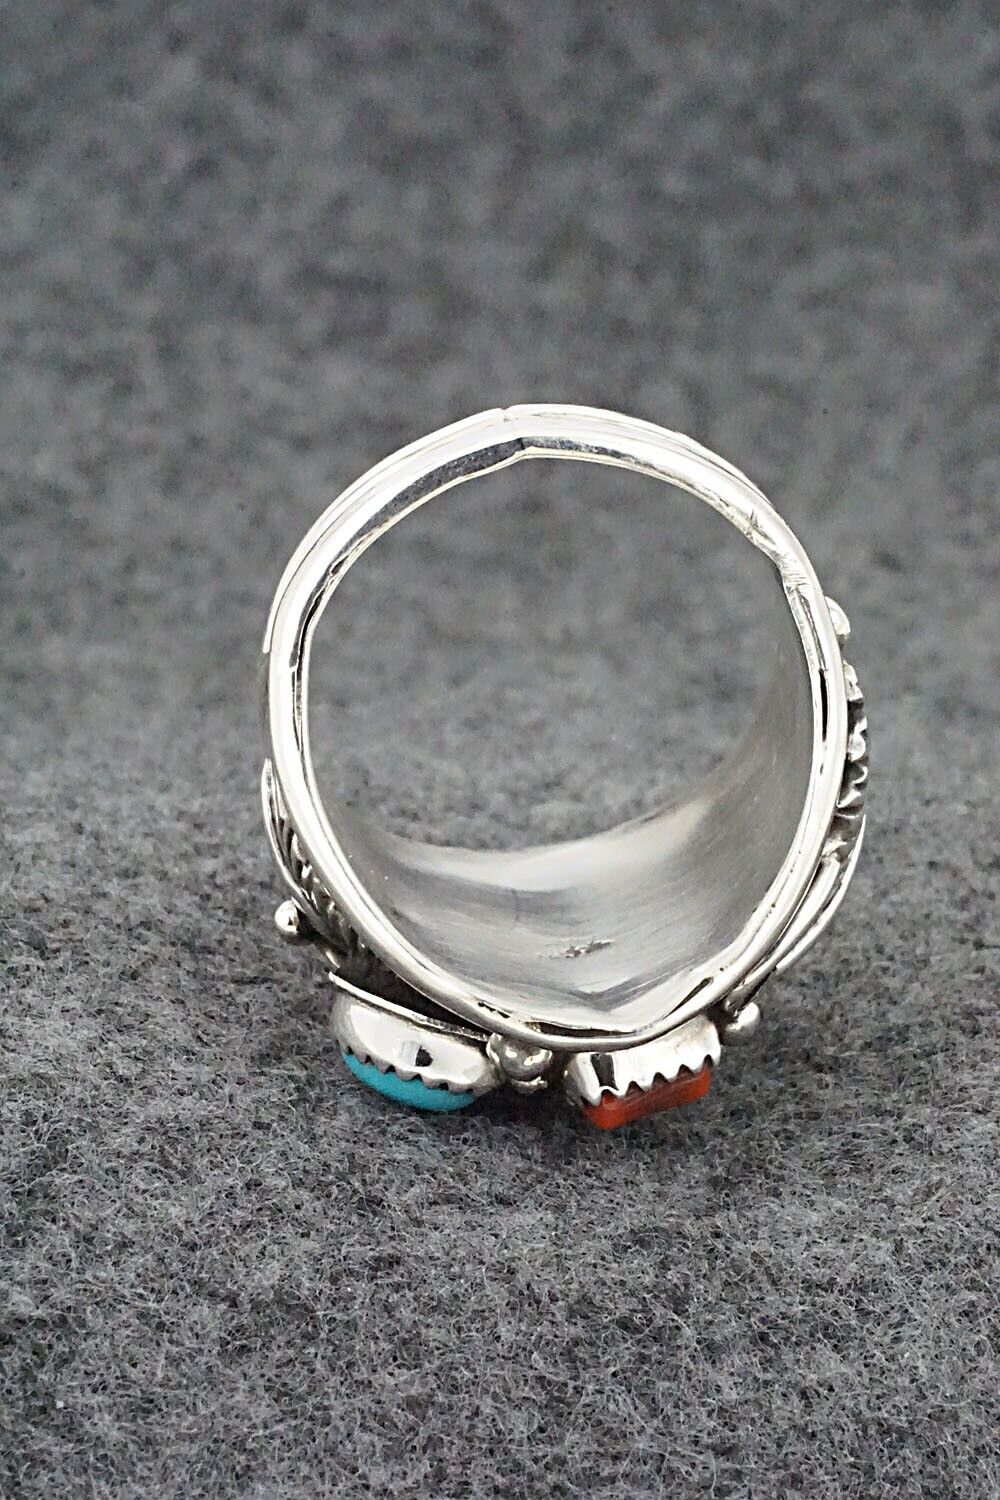 Turquoise, Coral & Sterling Silver Ring - Jeannette Saunders - Size 13.5